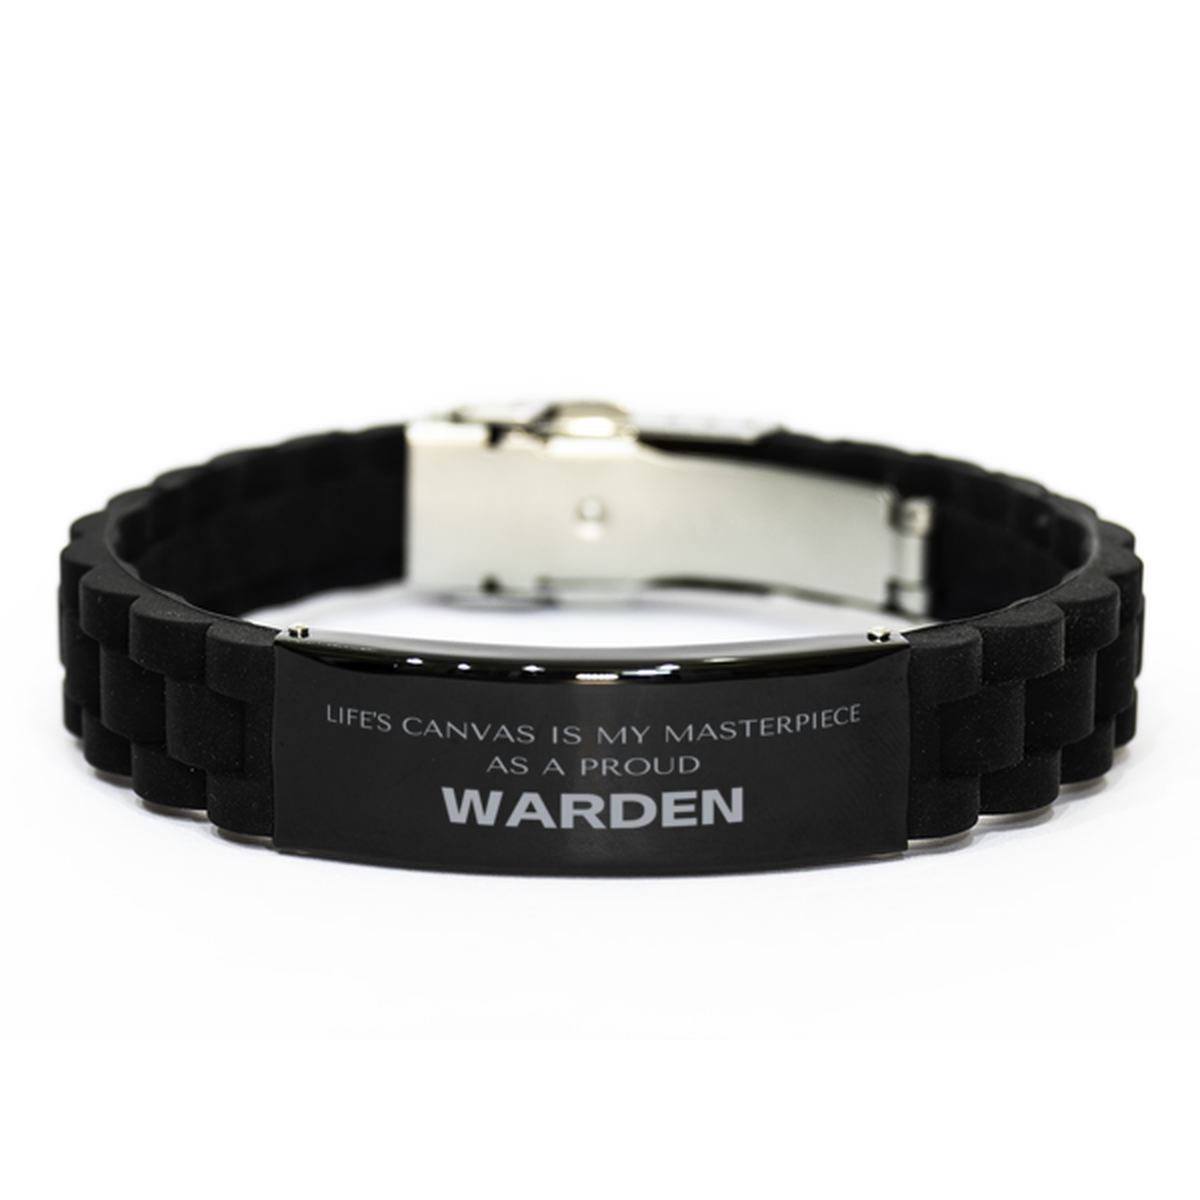 Proud Warden Gifts, Life's canvas is my masterpiece, Epic Birthday Christmas Unique Black Glidelock Clasp Bracelet For Warden, Coworkers, Men, Women, Friends